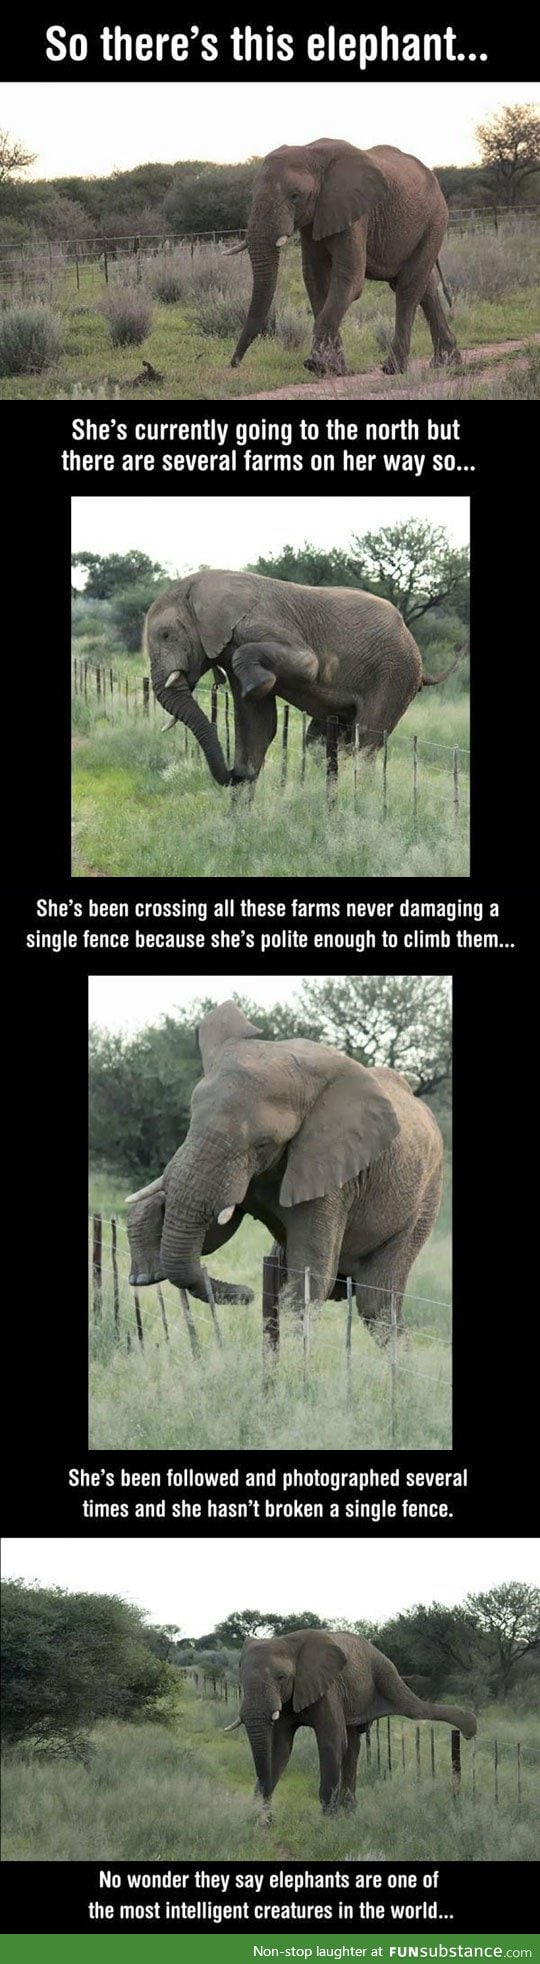 This elephant is special